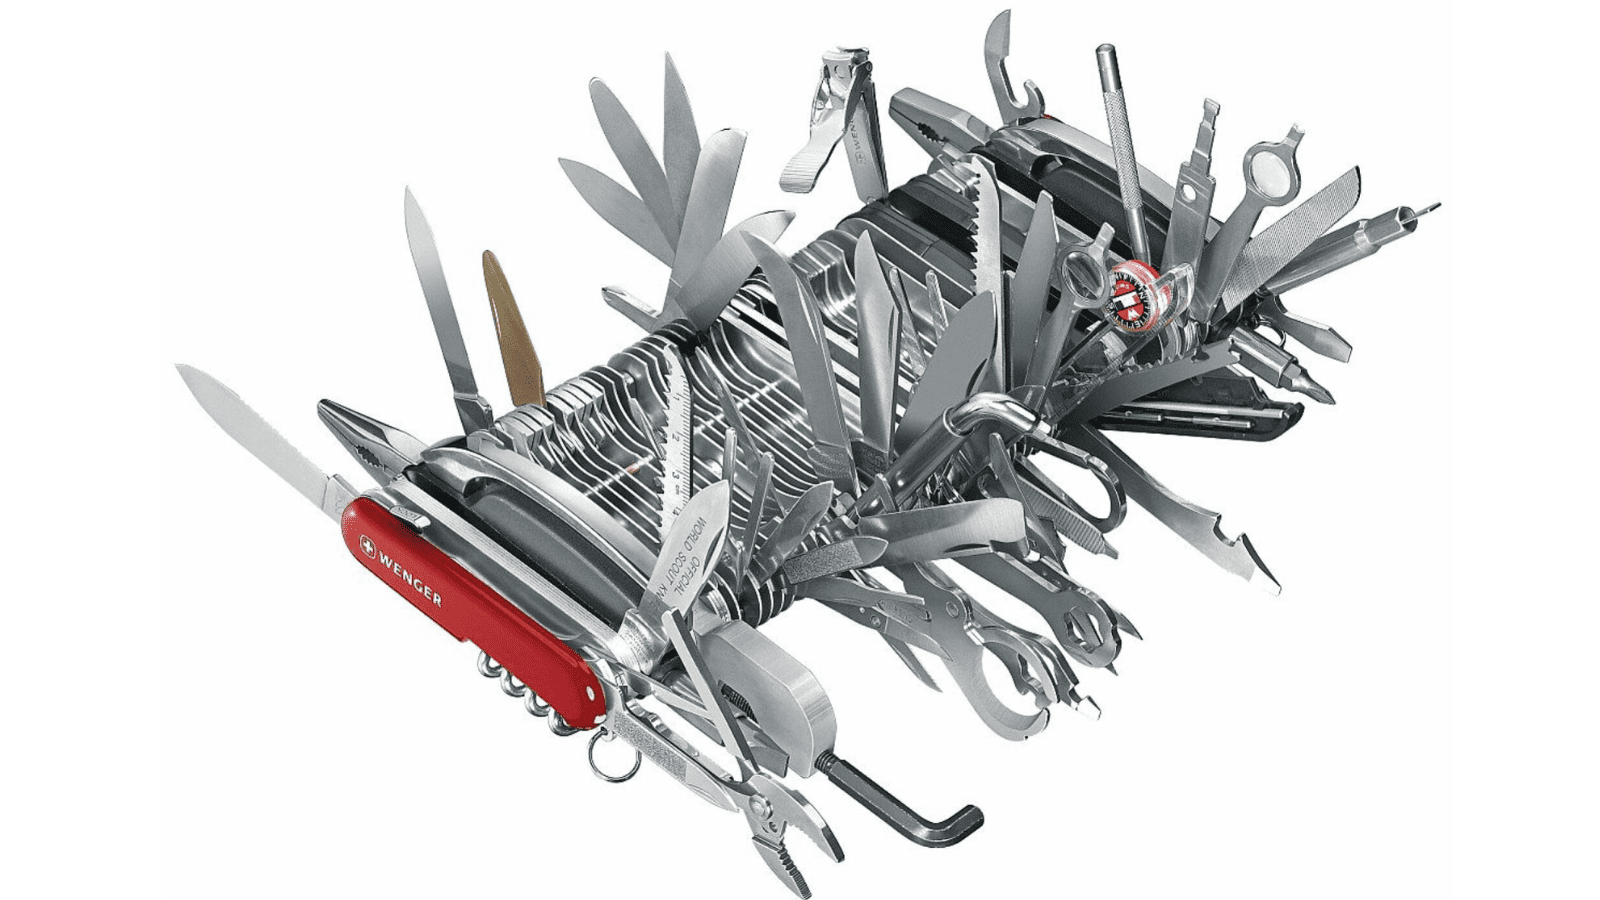 Swiss Army Knife with an exaggerated amount of attached tools which symbolizes the many roles a COO can perform